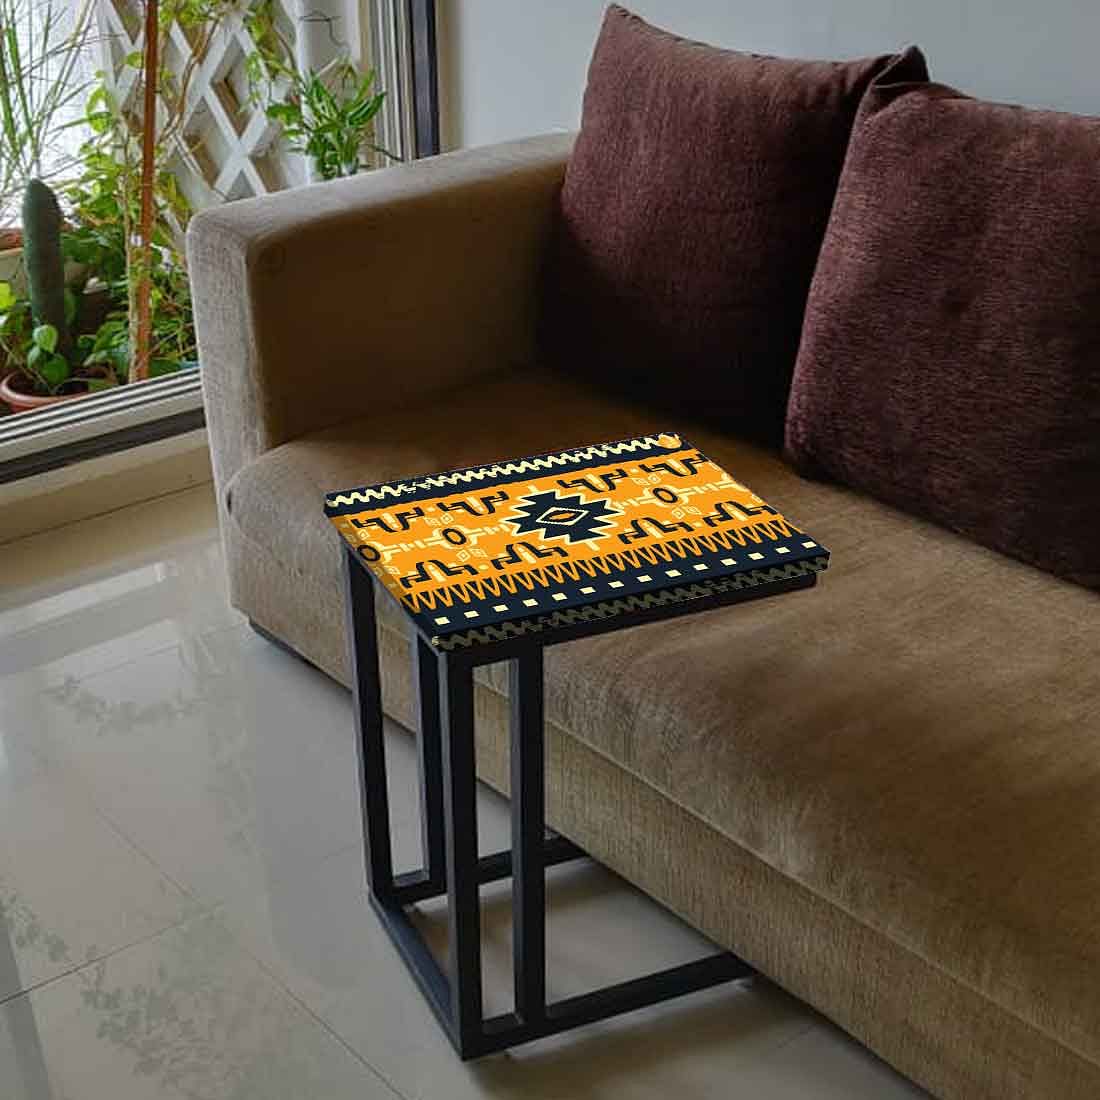 Metal C Shaped Table For Sofa - Beautiful Mexican Pattern Nutcase